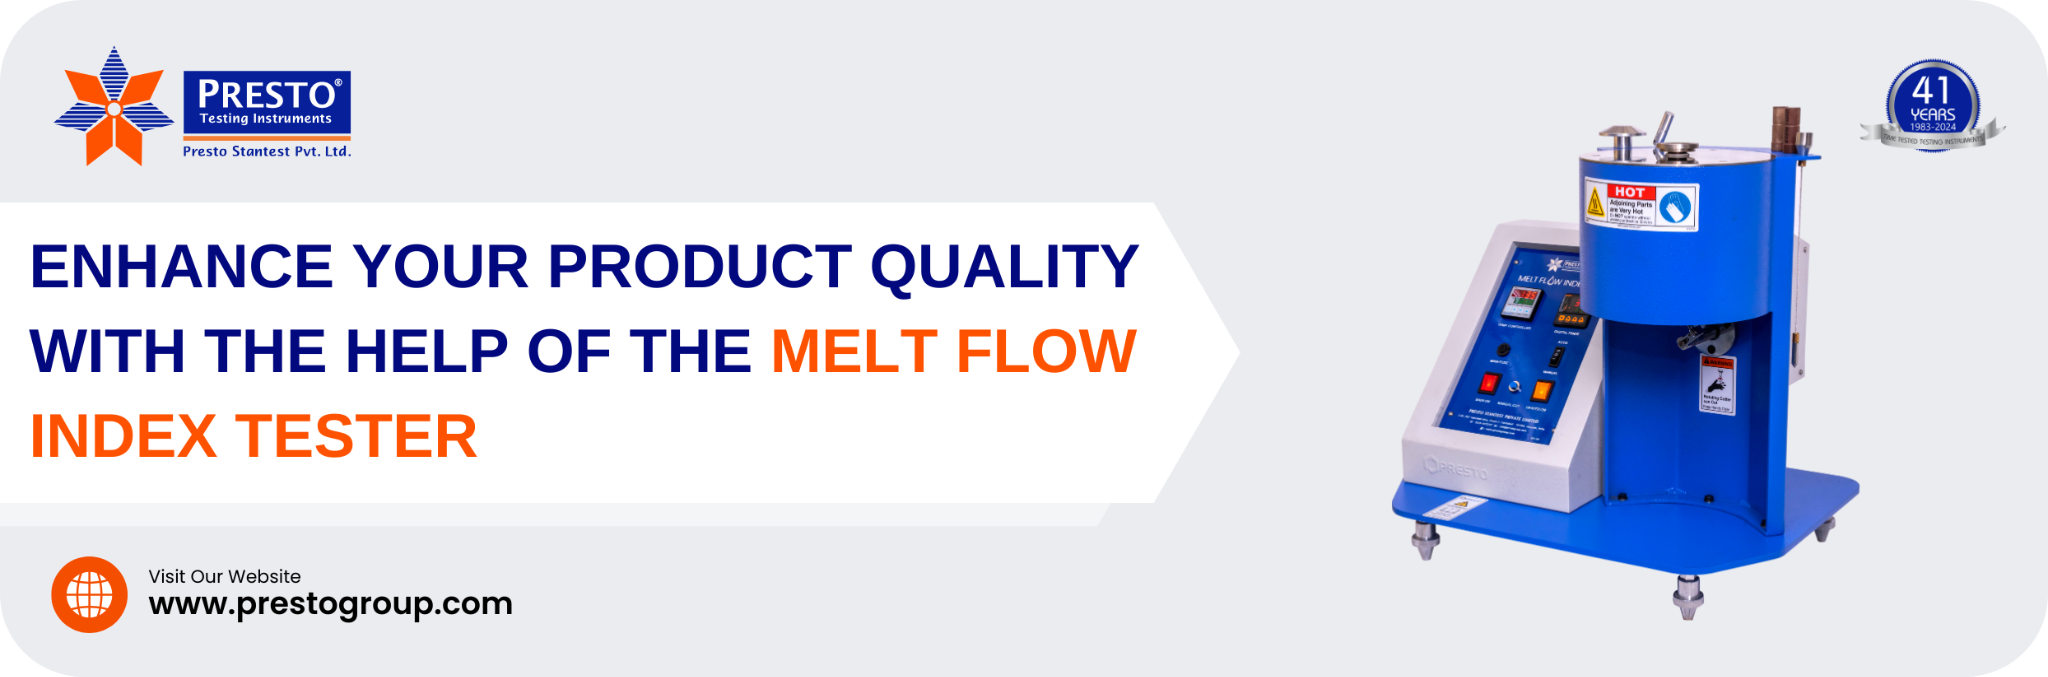 Enhance your Product Quality with the help of the Melt Flow Index Tester